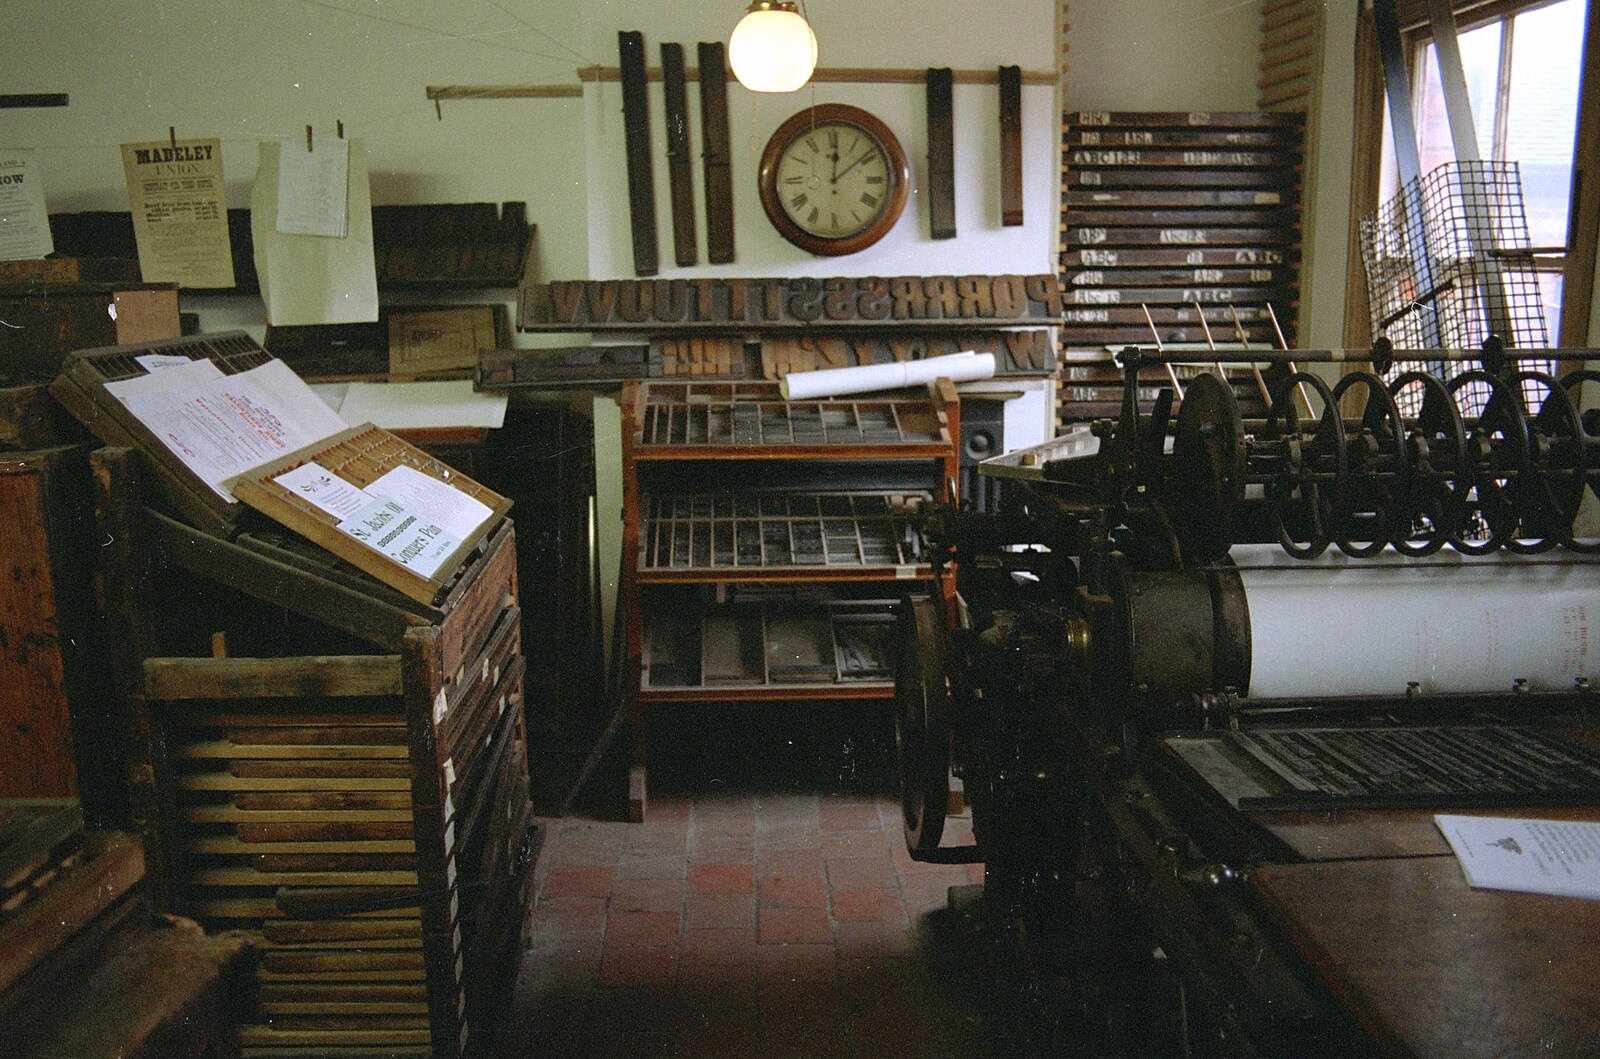 The museum's printing room from Capel Curig to Abergavenny: A Road-Trip With Hamish, Wales - 3rd April 1992